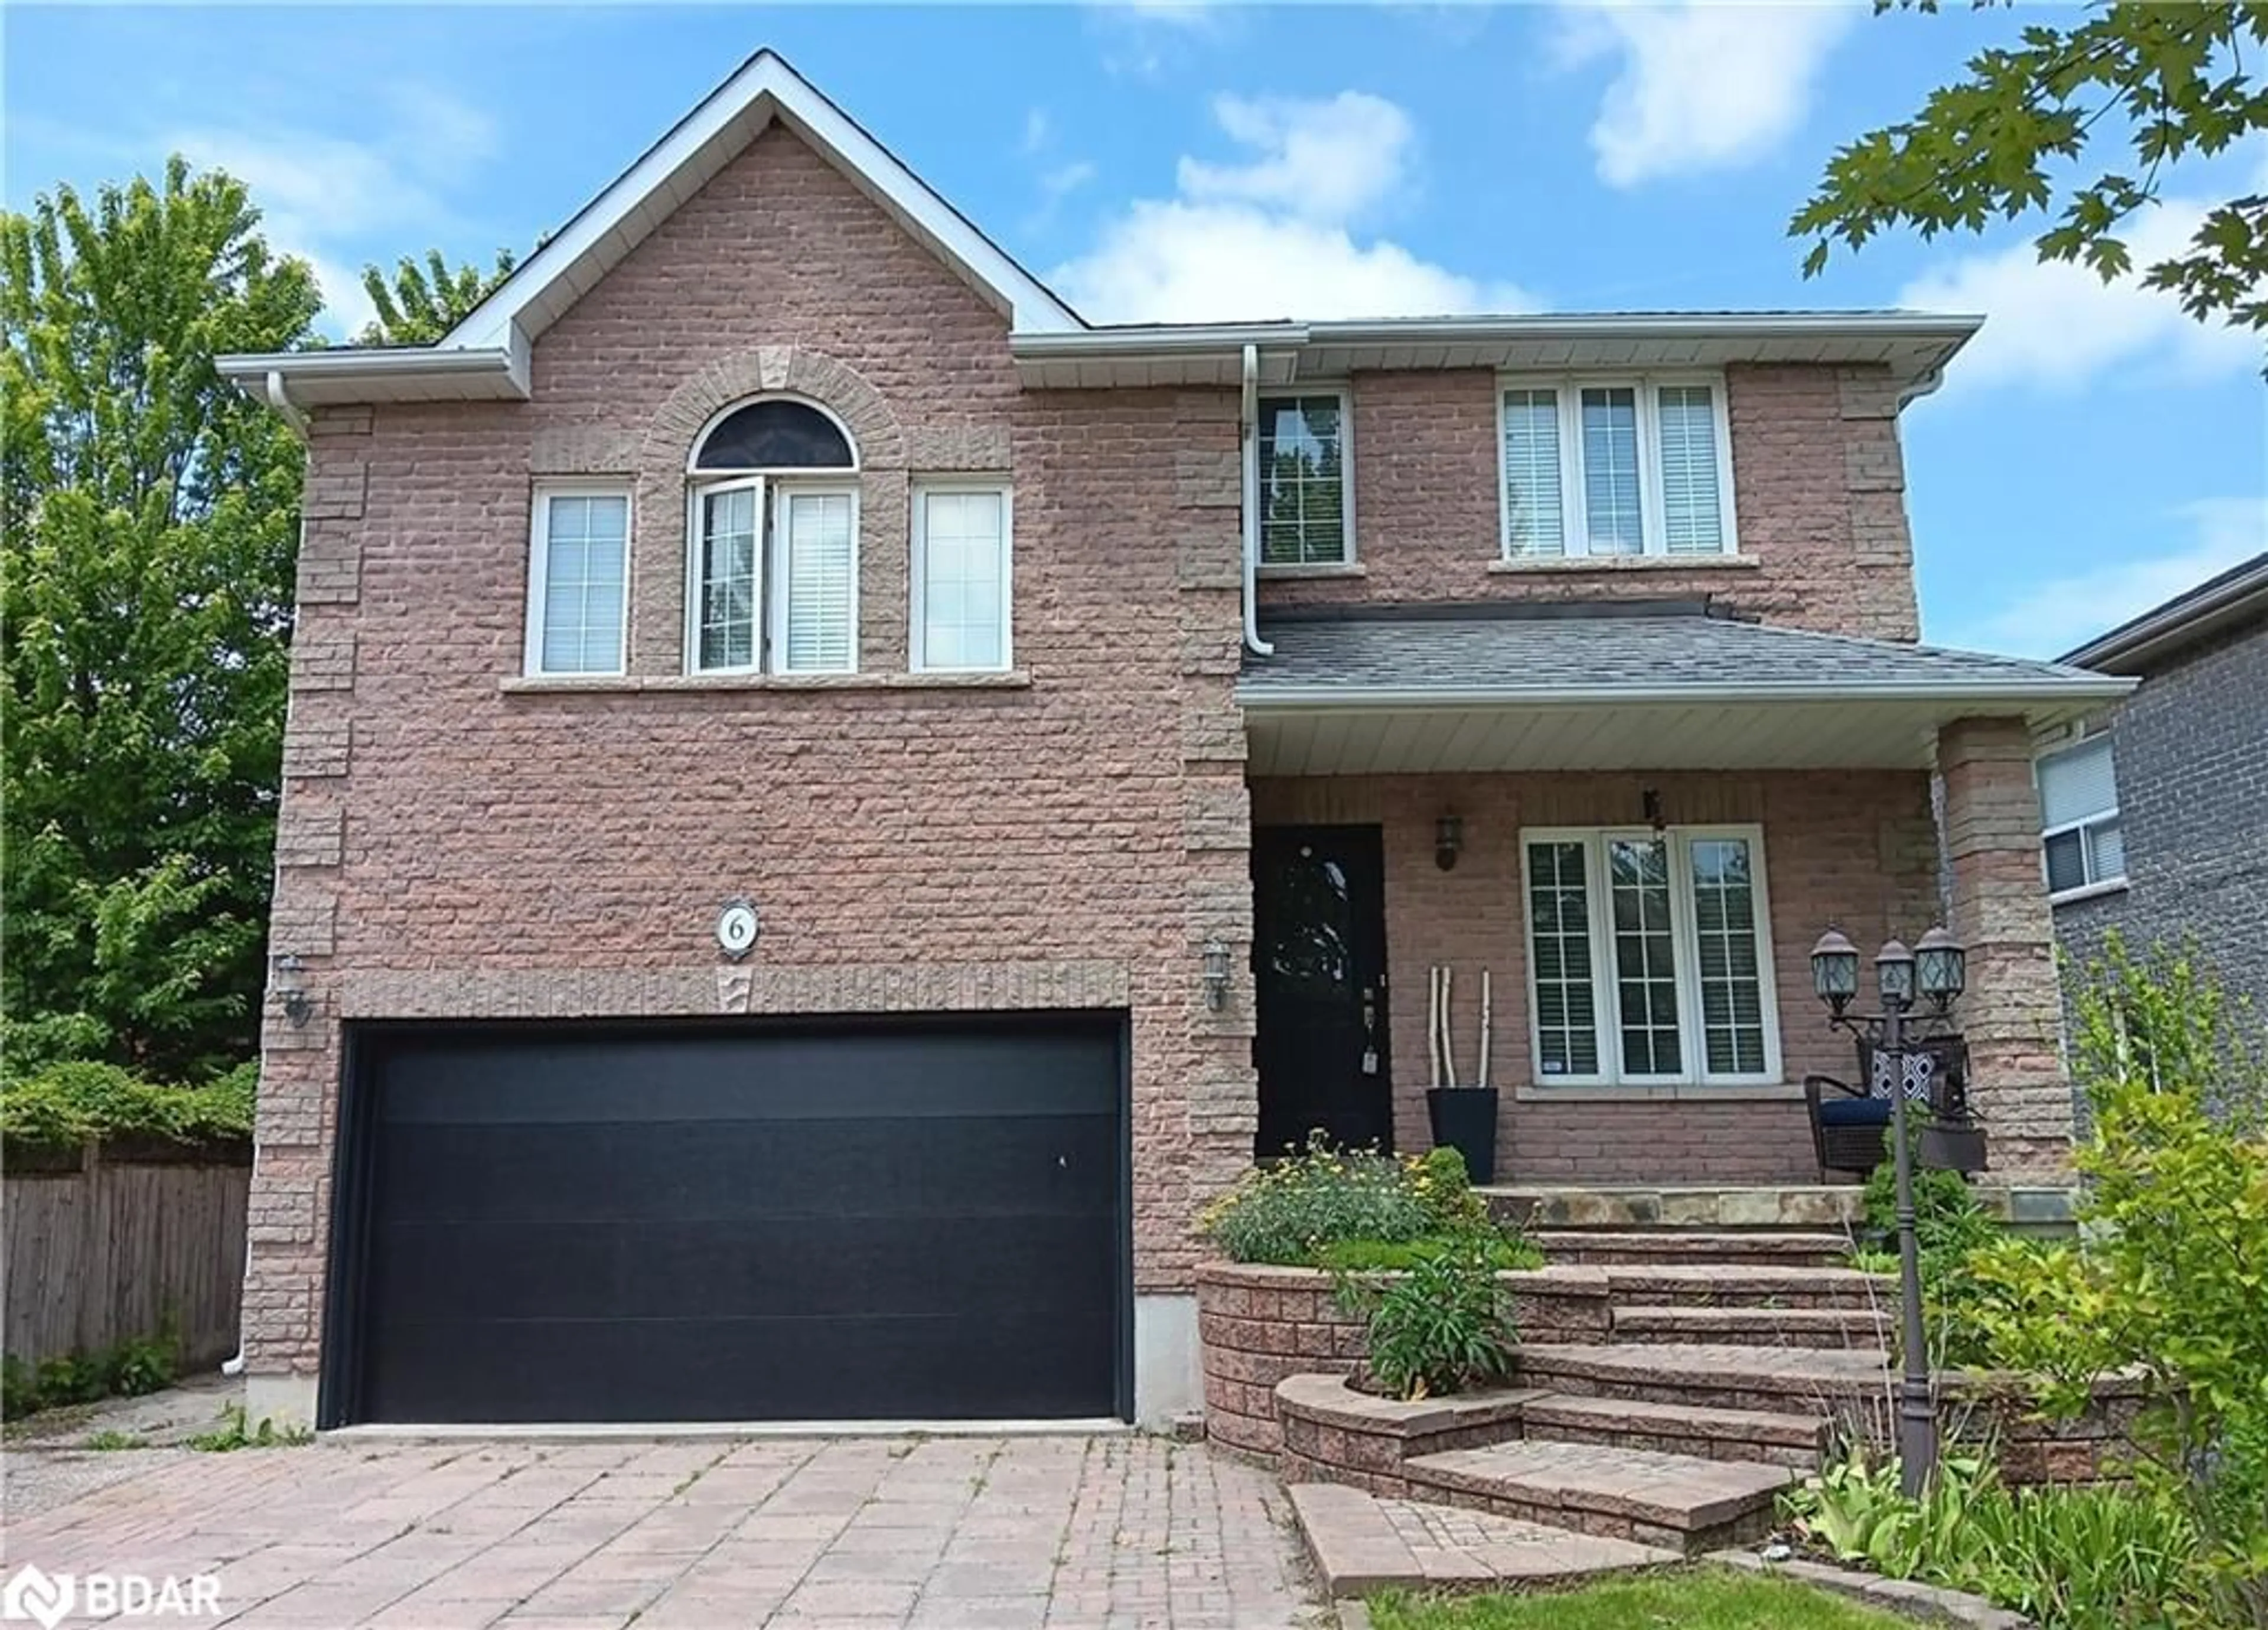 Home with brick exterior material for 6 Joseph Cres, Barrie Ontario L4N 0X9